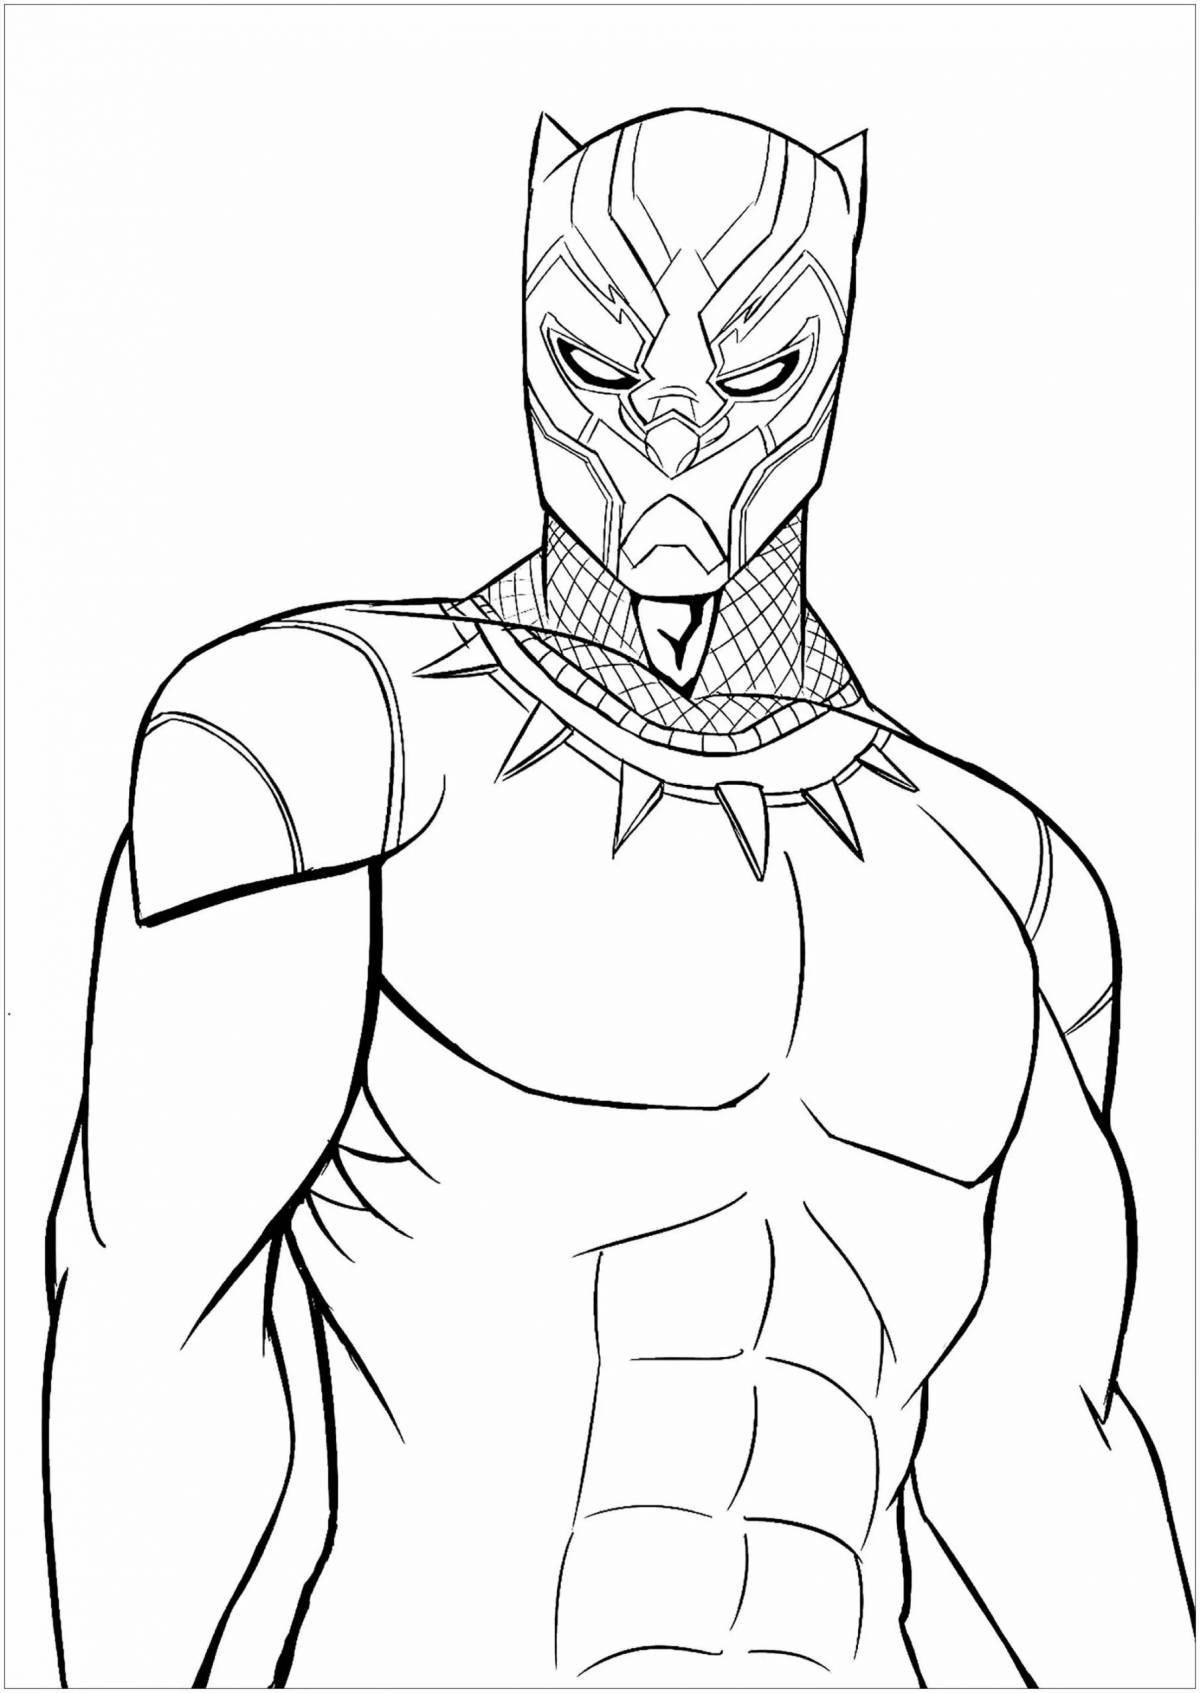 Grand Marvel Panther Coloring Page